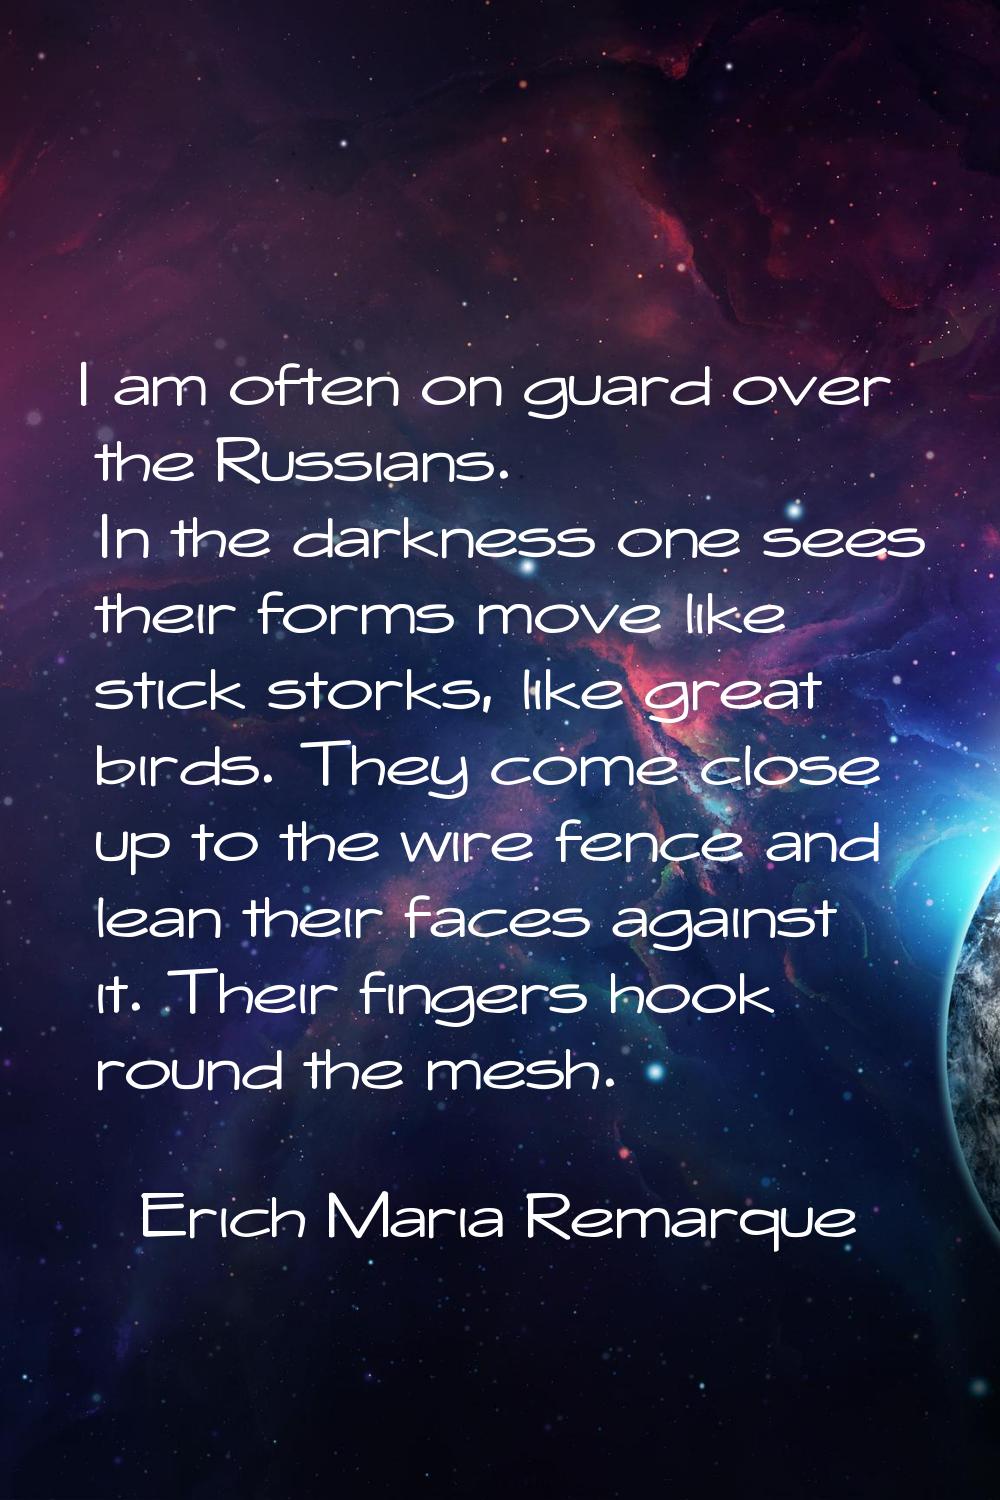 I am often on guard over the Russians. In the darkness one sees their forms move like stick storks,